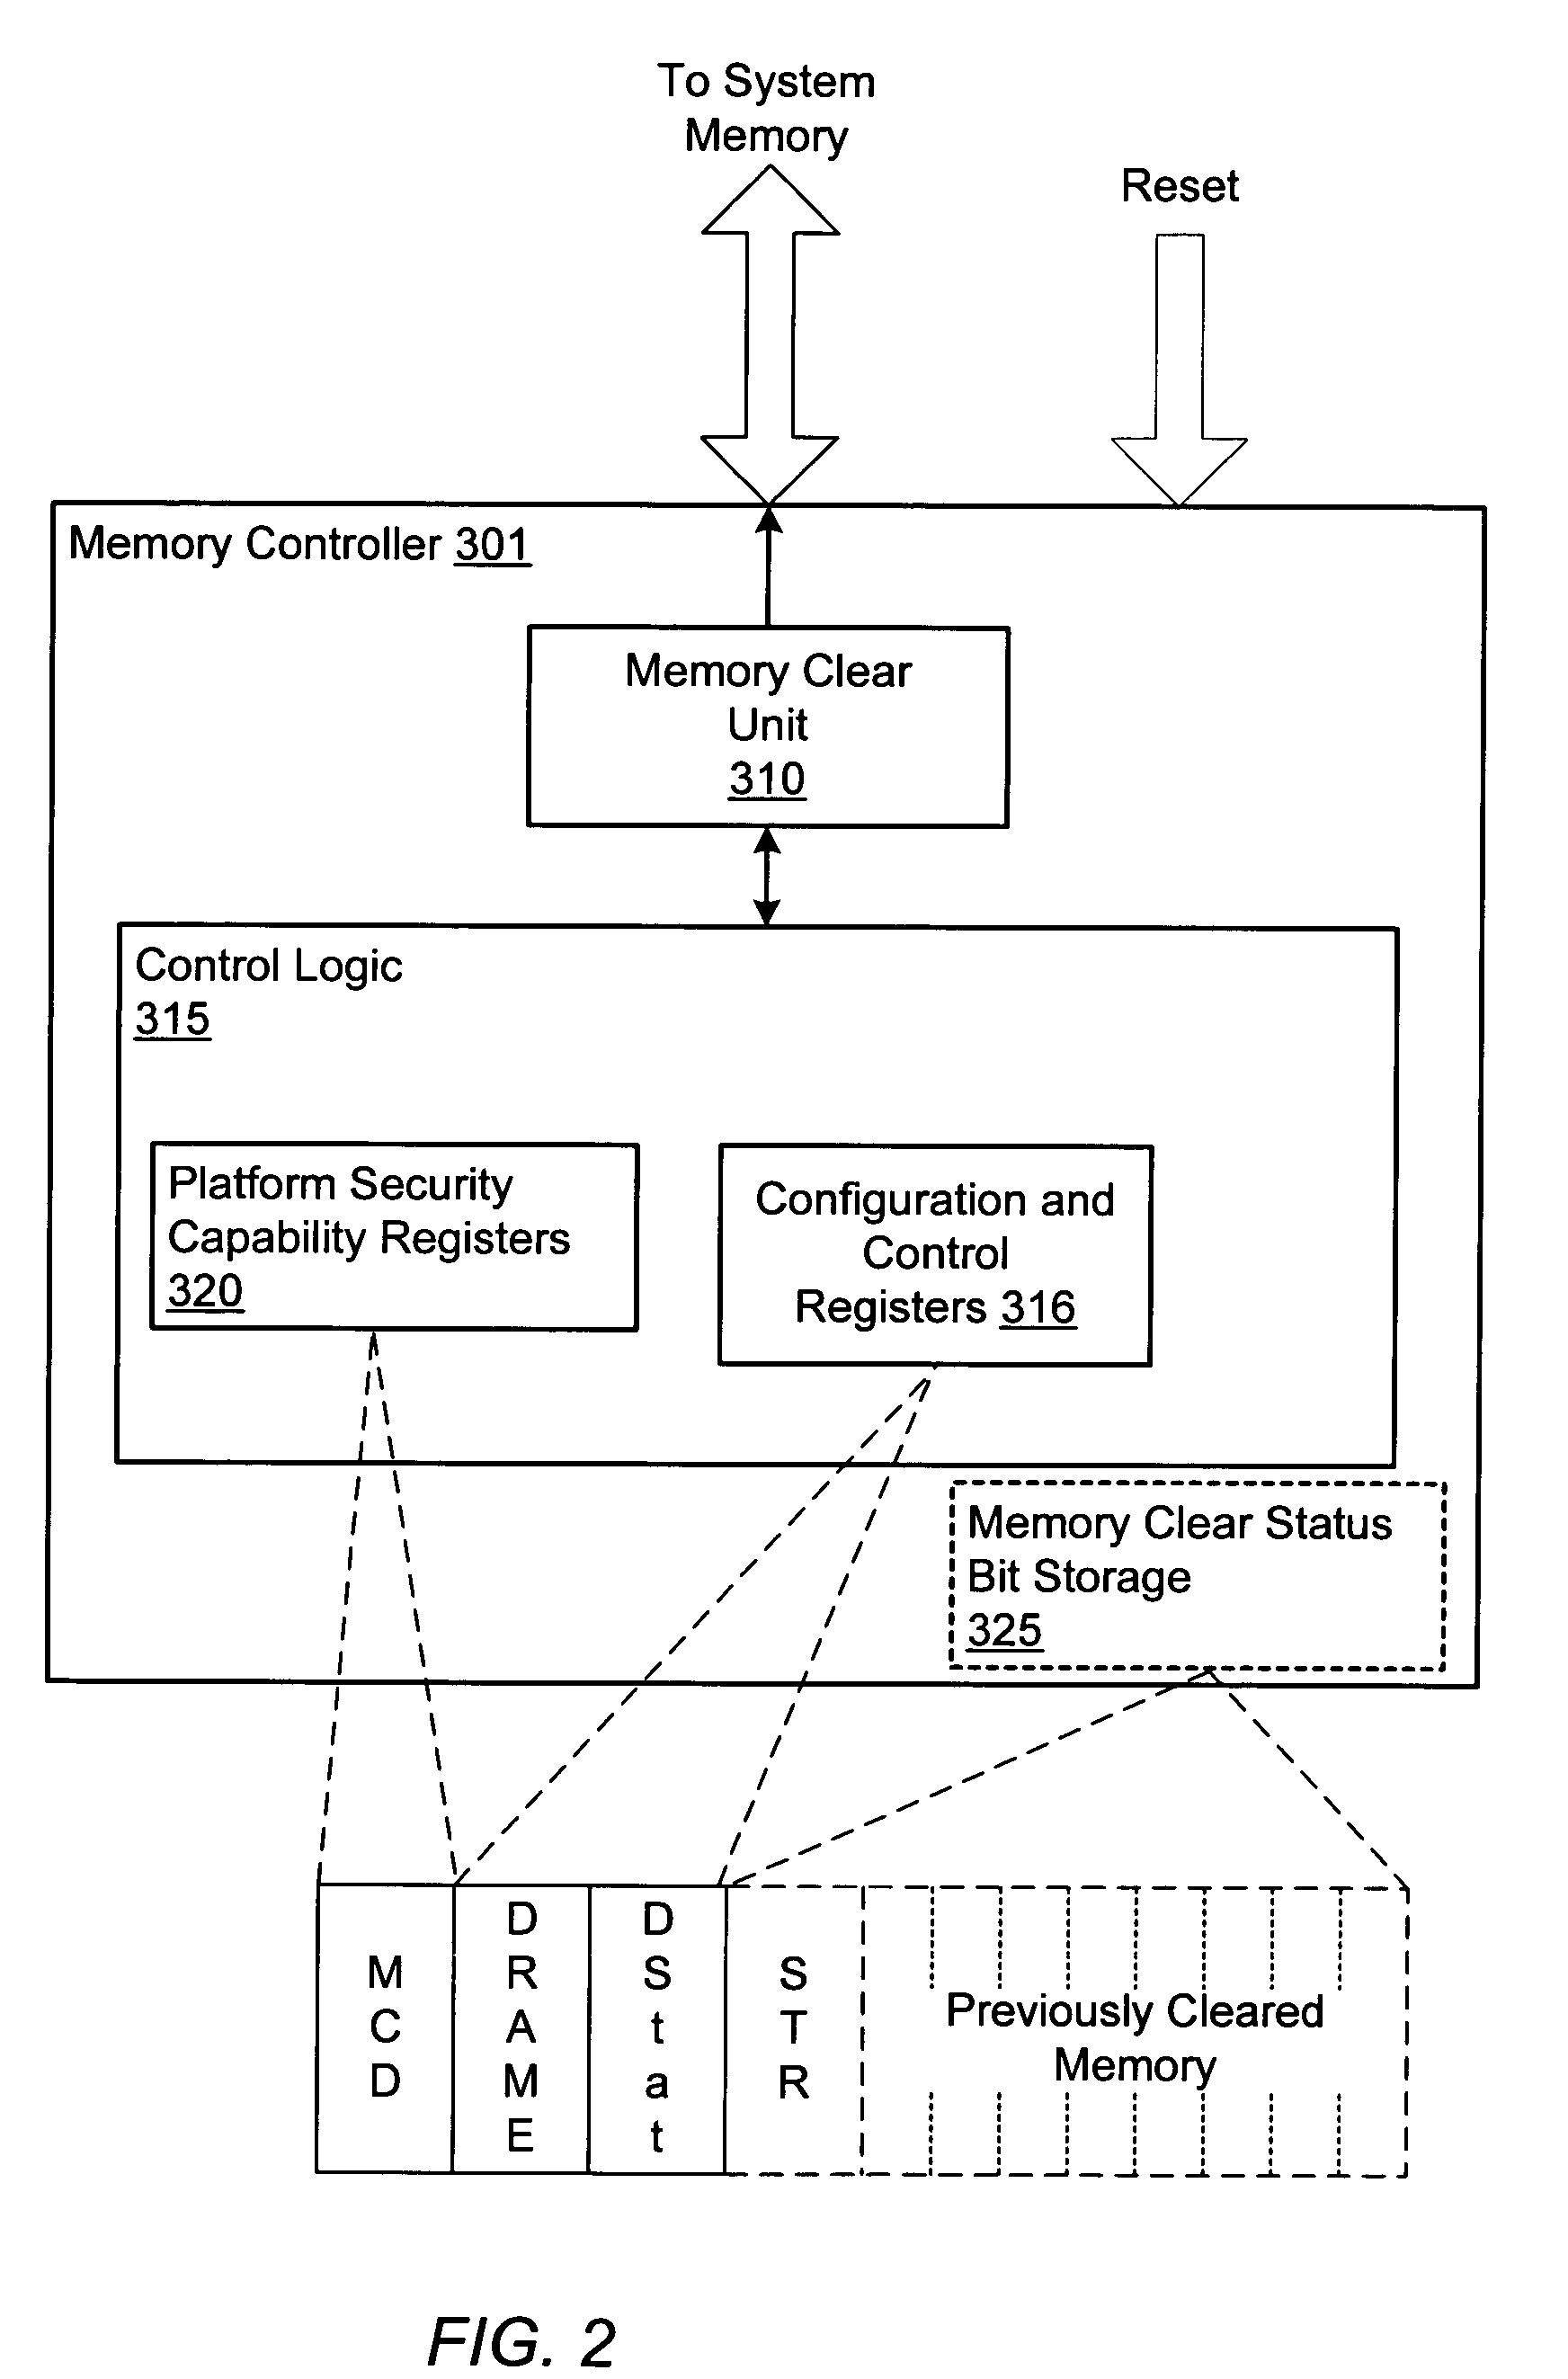 Computer system employing a trusted execution environment including a memory controller configured to clear memory